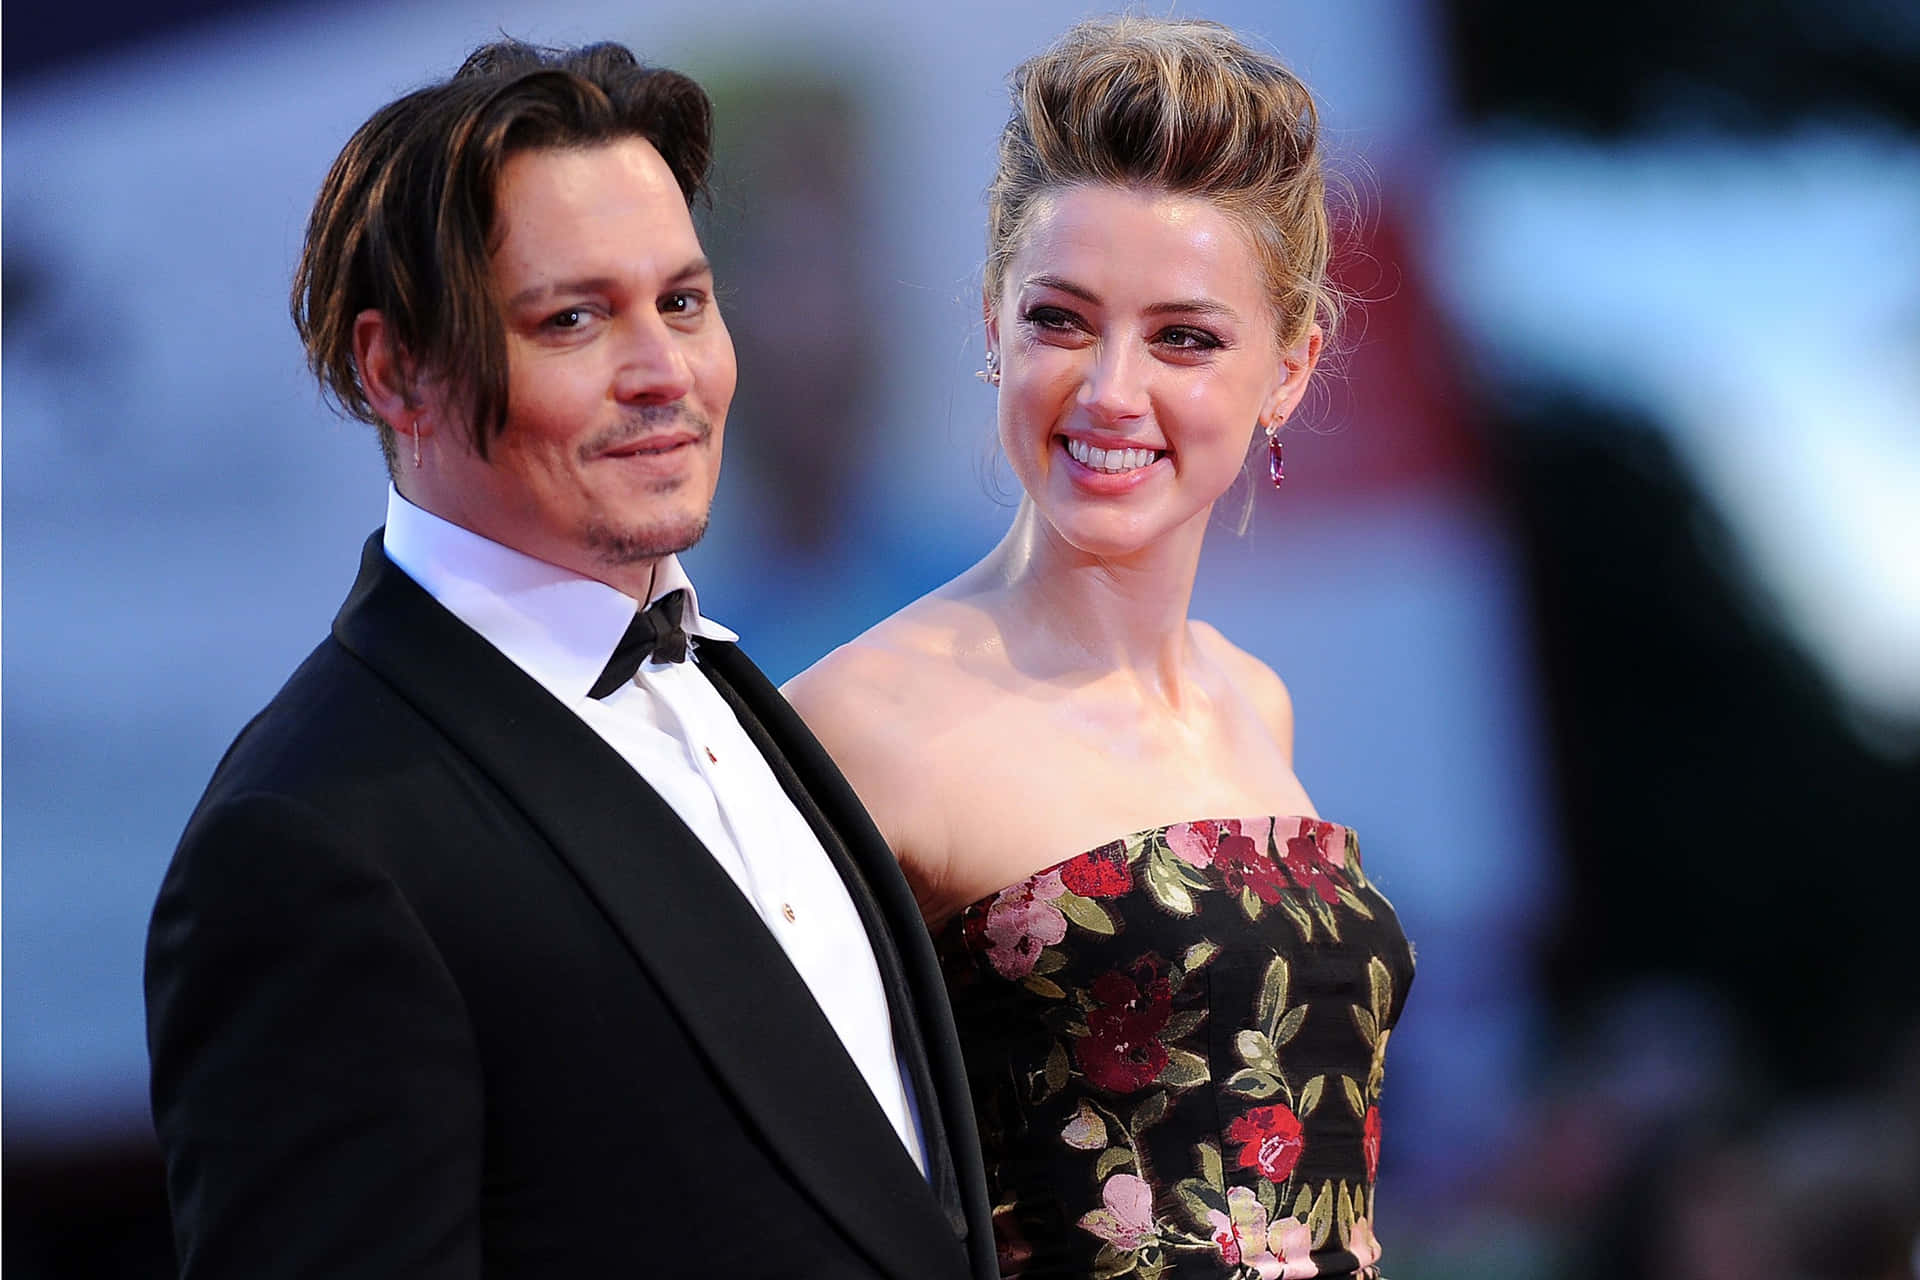 Johnny Depp and Amber Heard share a romantic moment